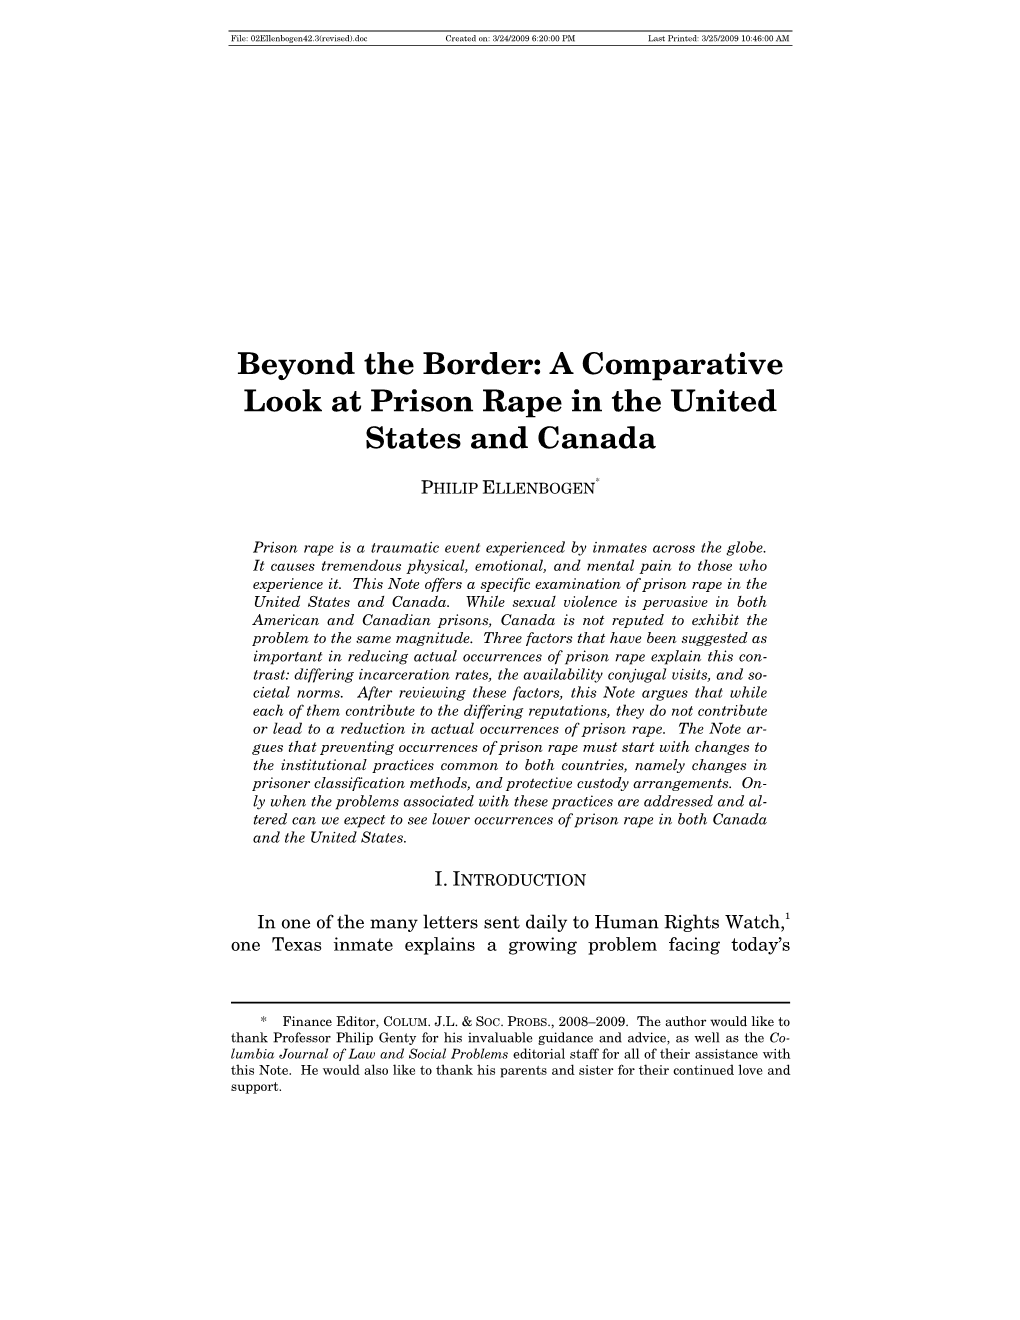 Beyond the Border: a Comparative Look at Prison Rape in the United States and Canada